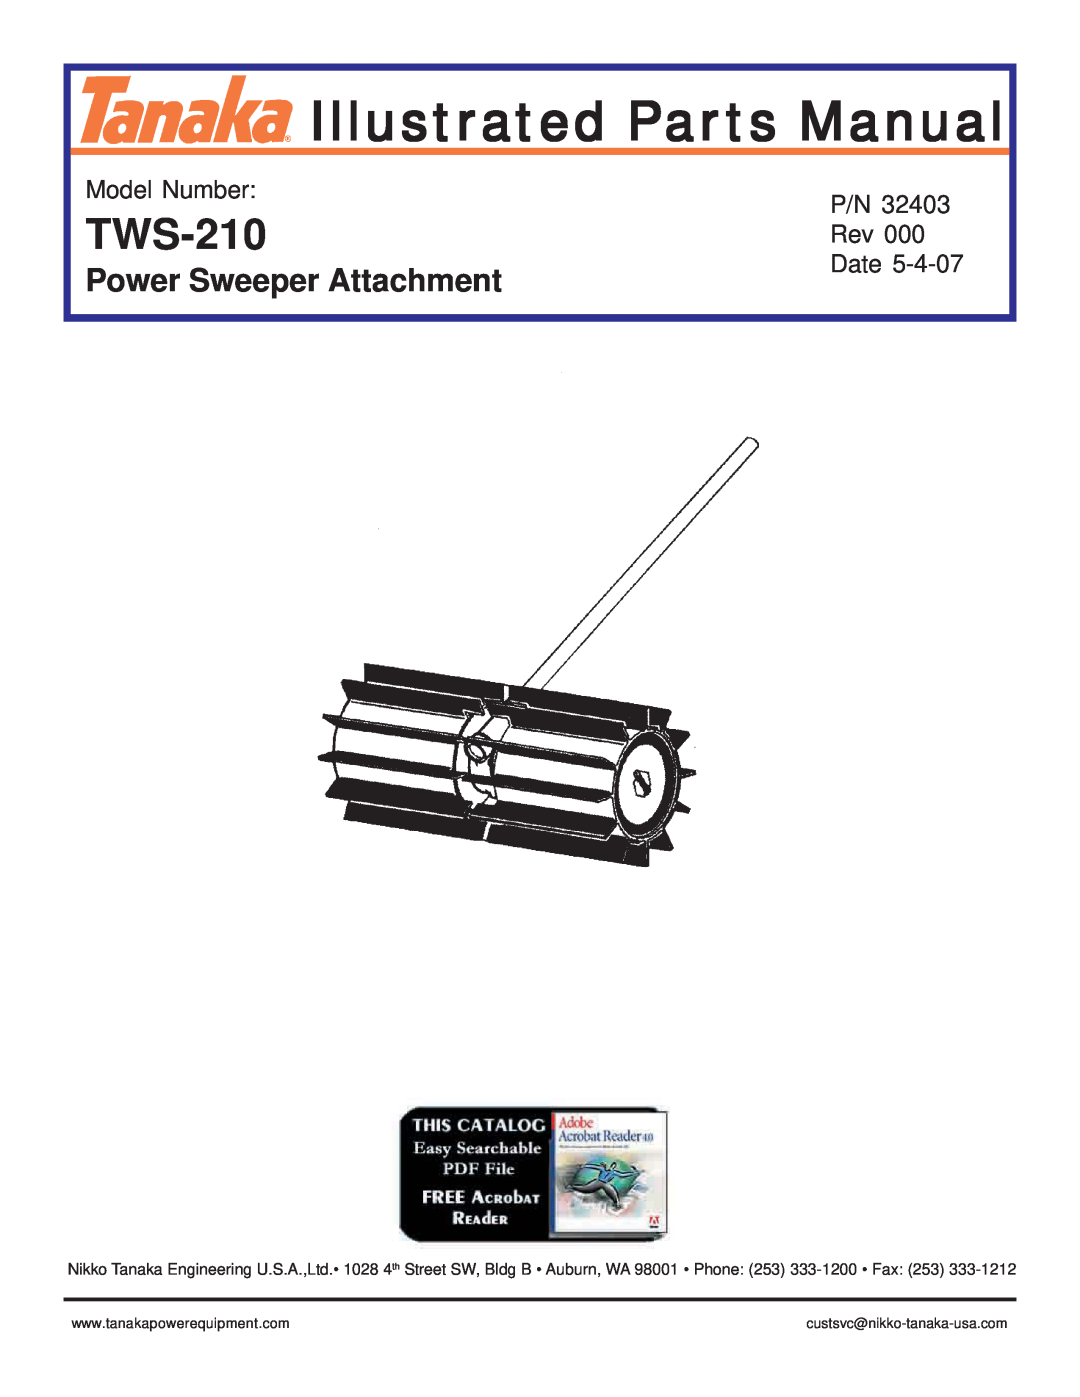 Tanaka TSW-210 manual TWS-210, Model Number, Date, Illustrated Parts Manual, Power Sweeper Attachment 